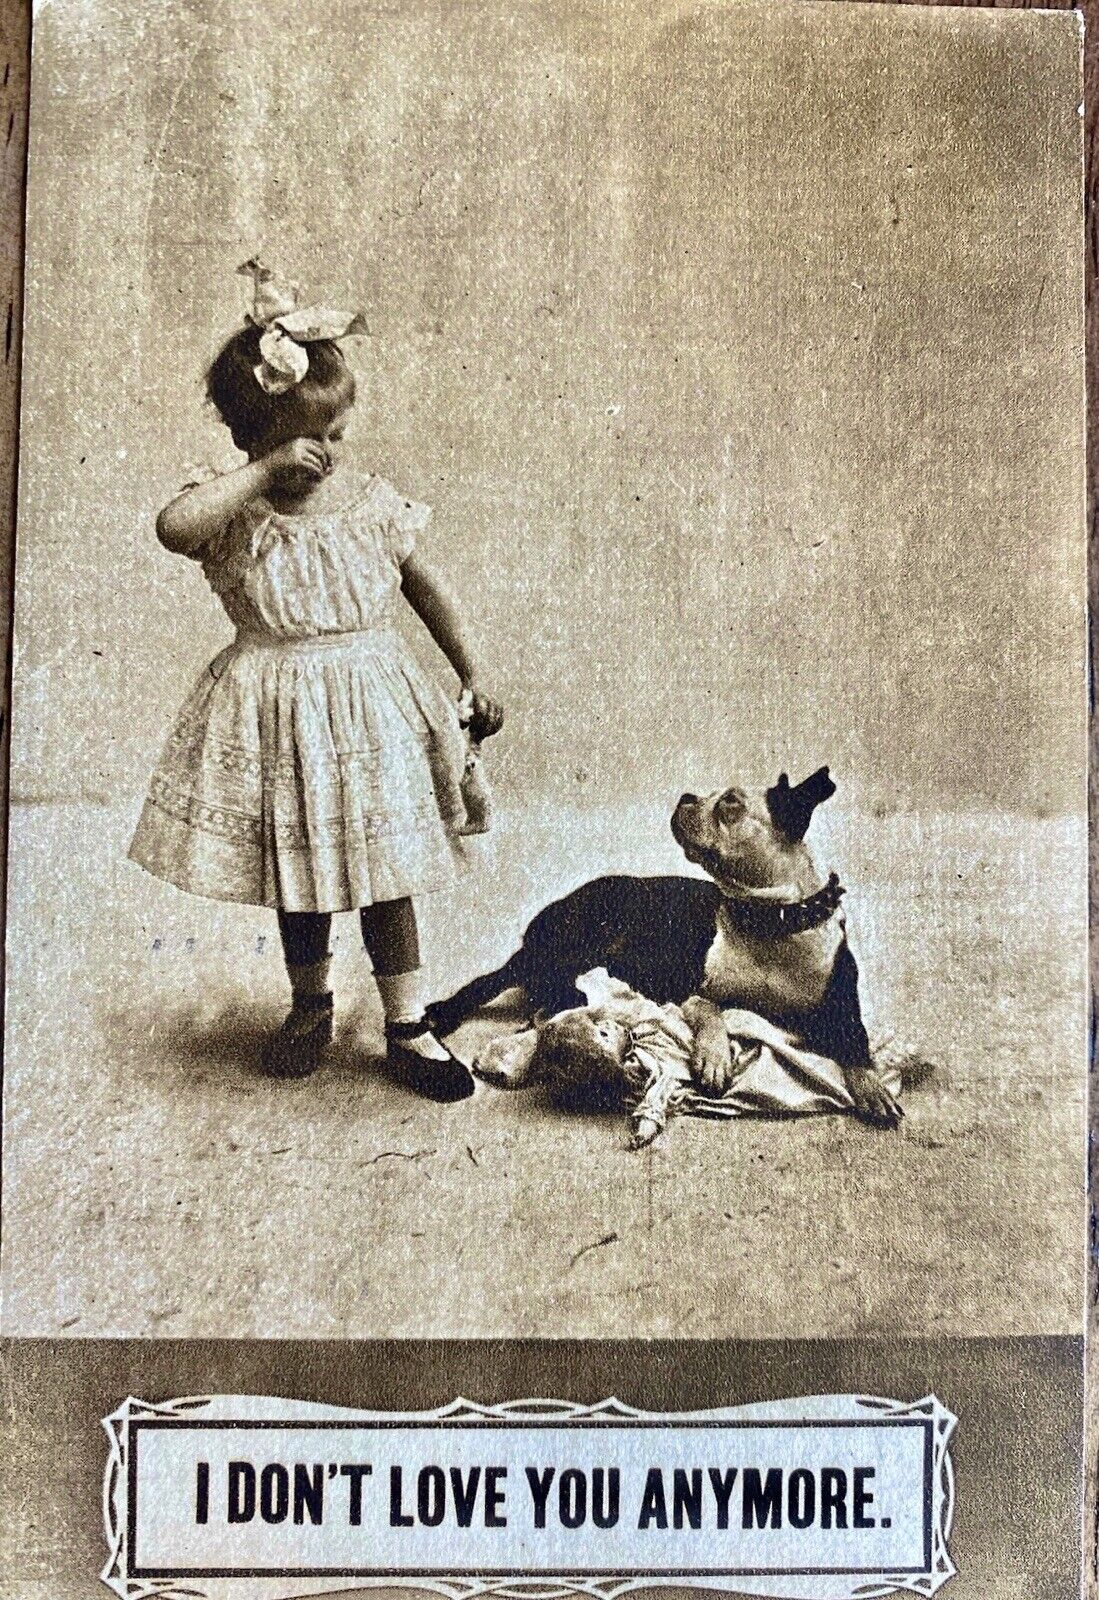 VINTAGE 1910 REAL PHOTO BOSTON TERRIER POSTCARD “I DON’T LOVE YOU ANYMORE”